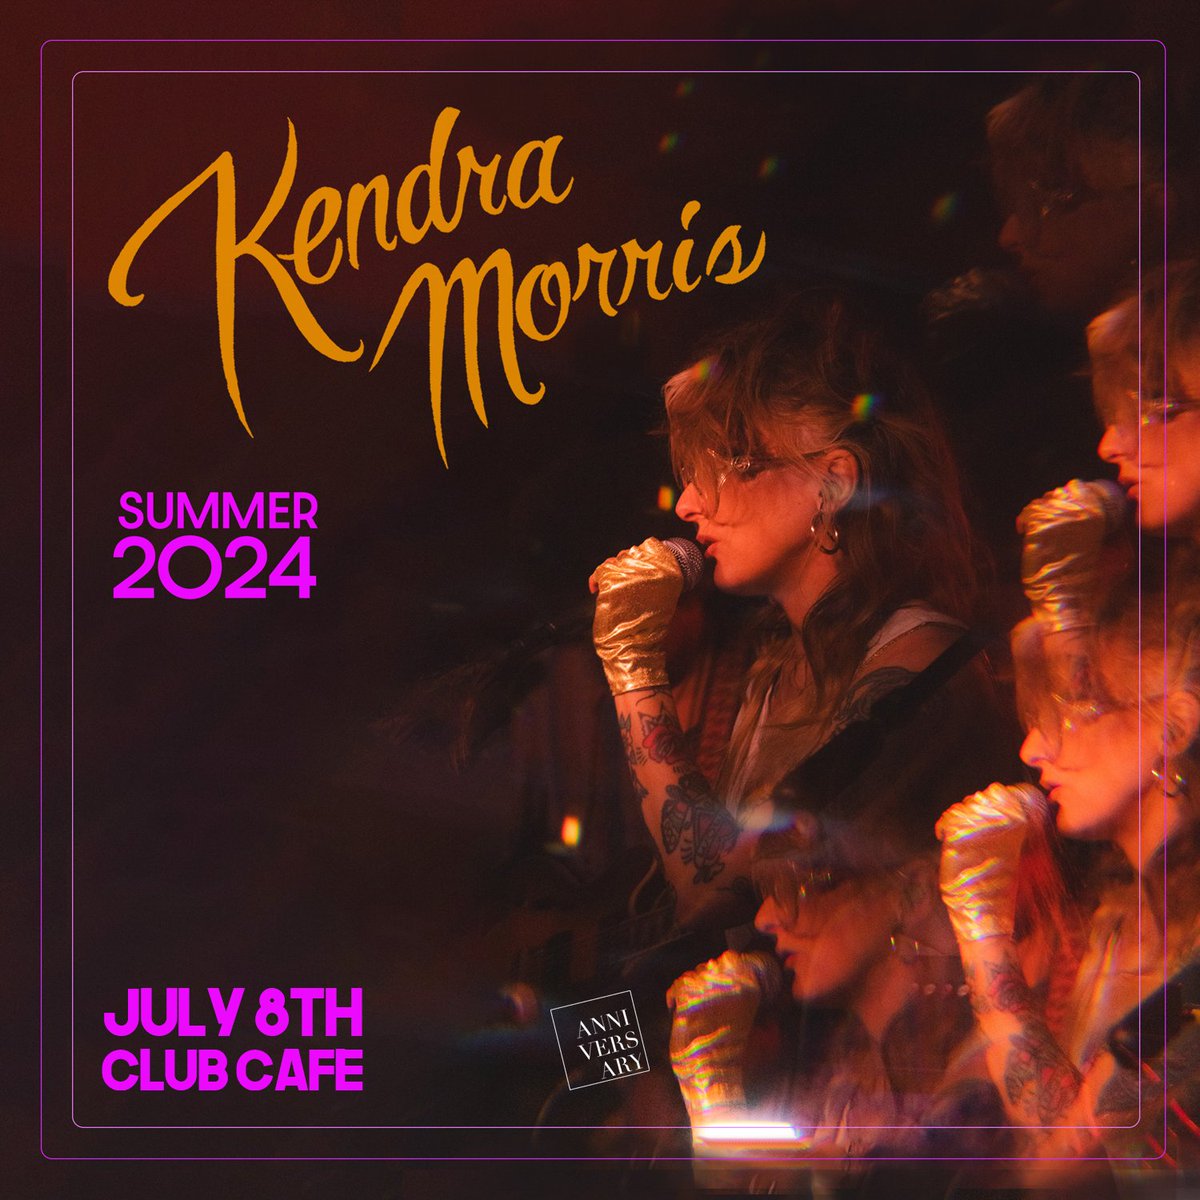 📣🗓 NEW SHOW 🗓📣

@ClubCafeLive | 07/08 | @KendraMorris! 

🎟 On Sale 05/09 at 11AM via: hive.co/l/0708kendramo… 

#opusonepgh #pittsburgh #kendamorris #clubcafe #clubcafelive #natinoal #singersongwriter #soulvibe